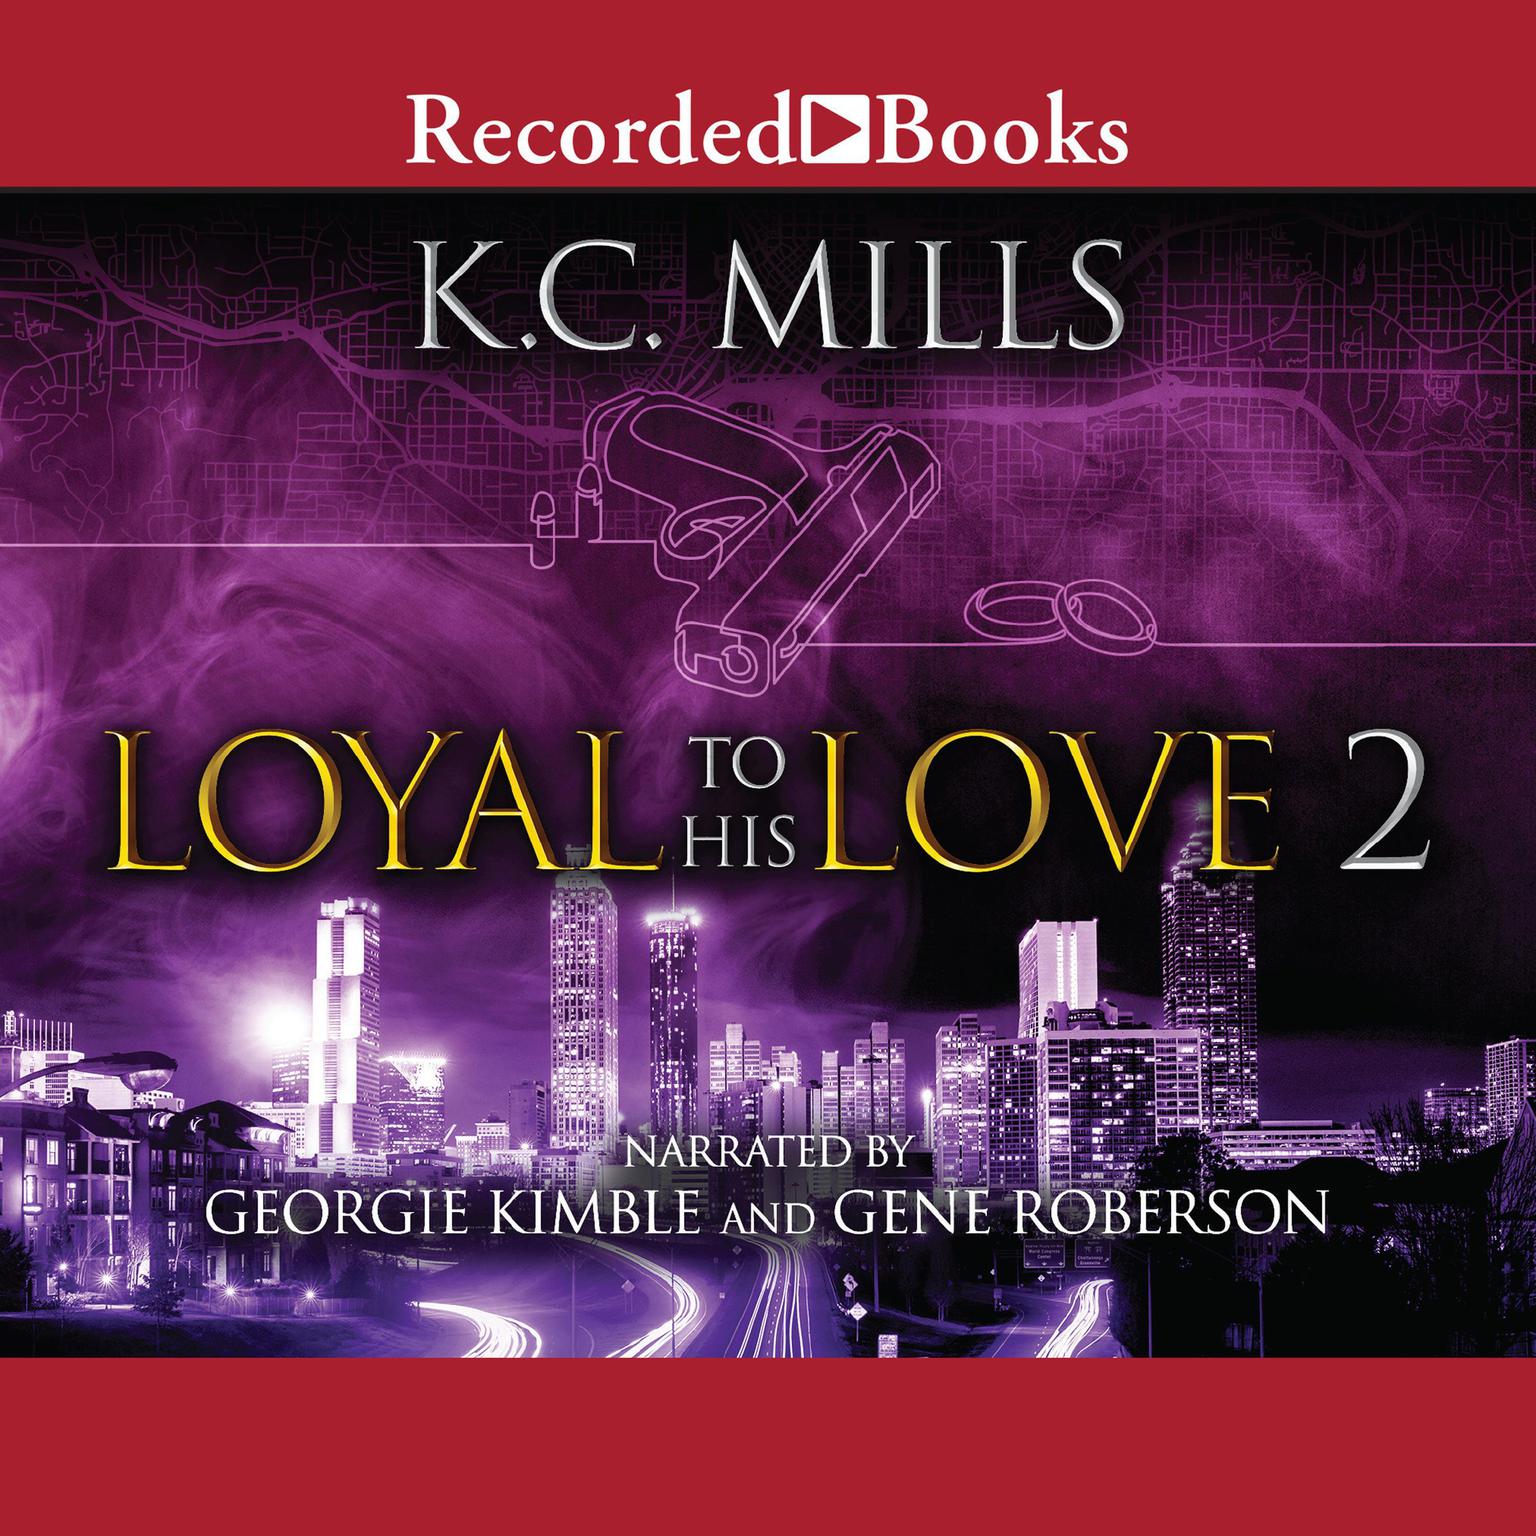 Loyal to His Love 2 Audiobook, by K. Charelle